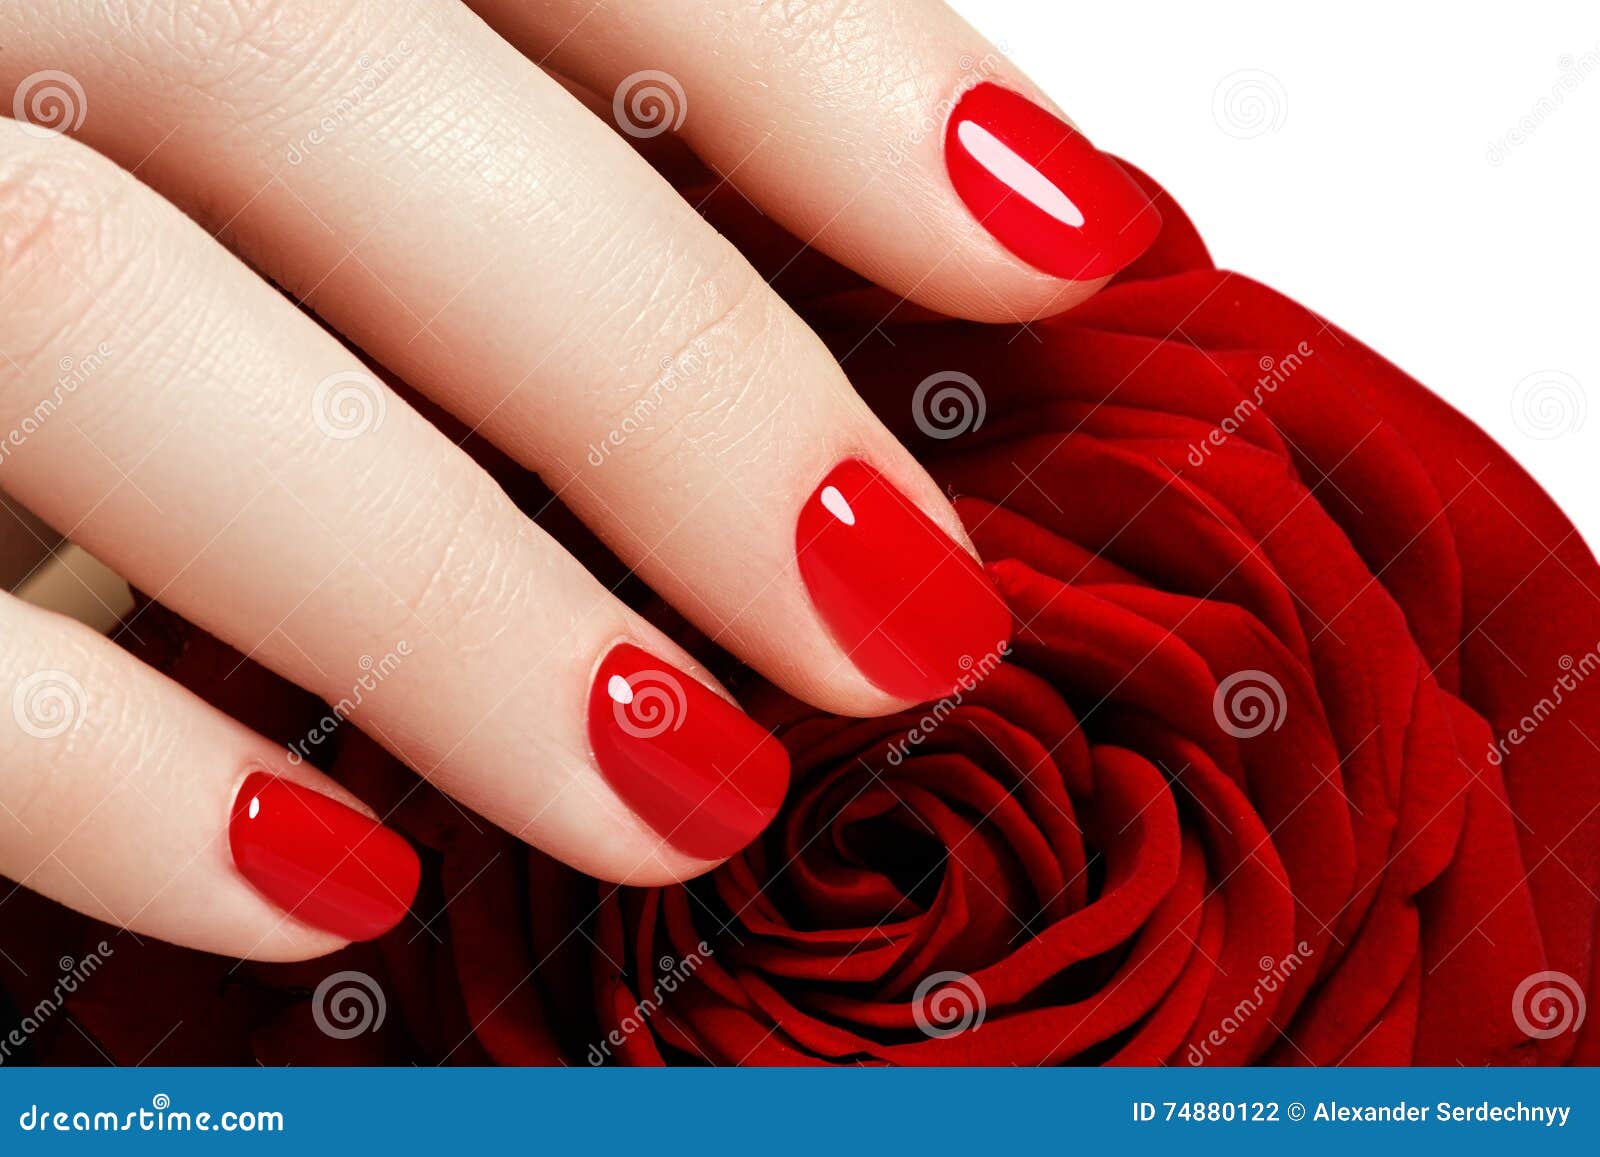 Manicure Beautiful Manicured Woman S Hands With Red Nail